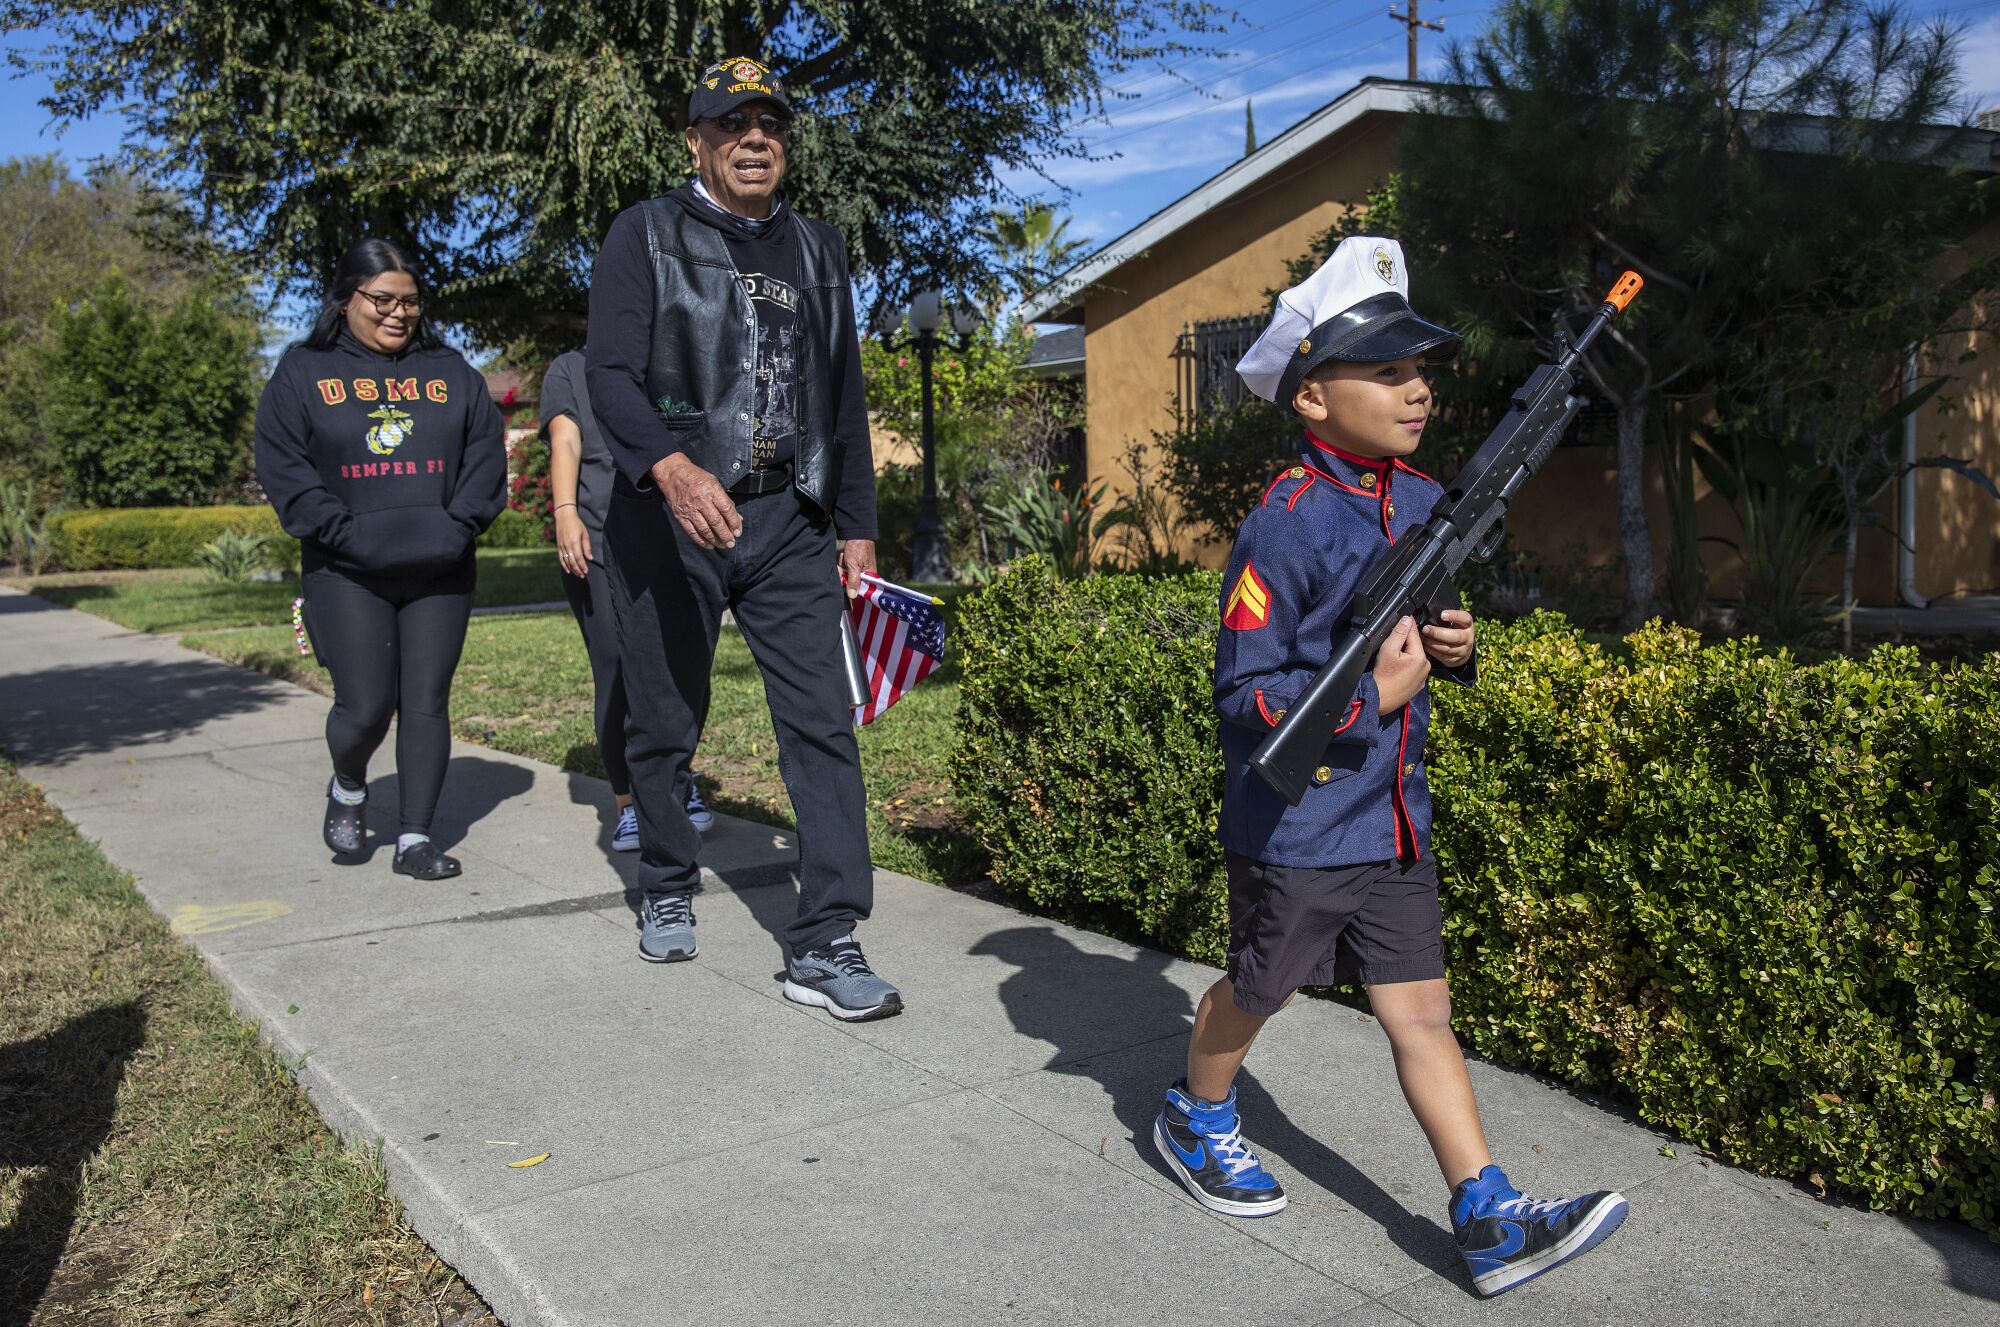 A boy with a toy rifle walks before several adults on a sidewalk 